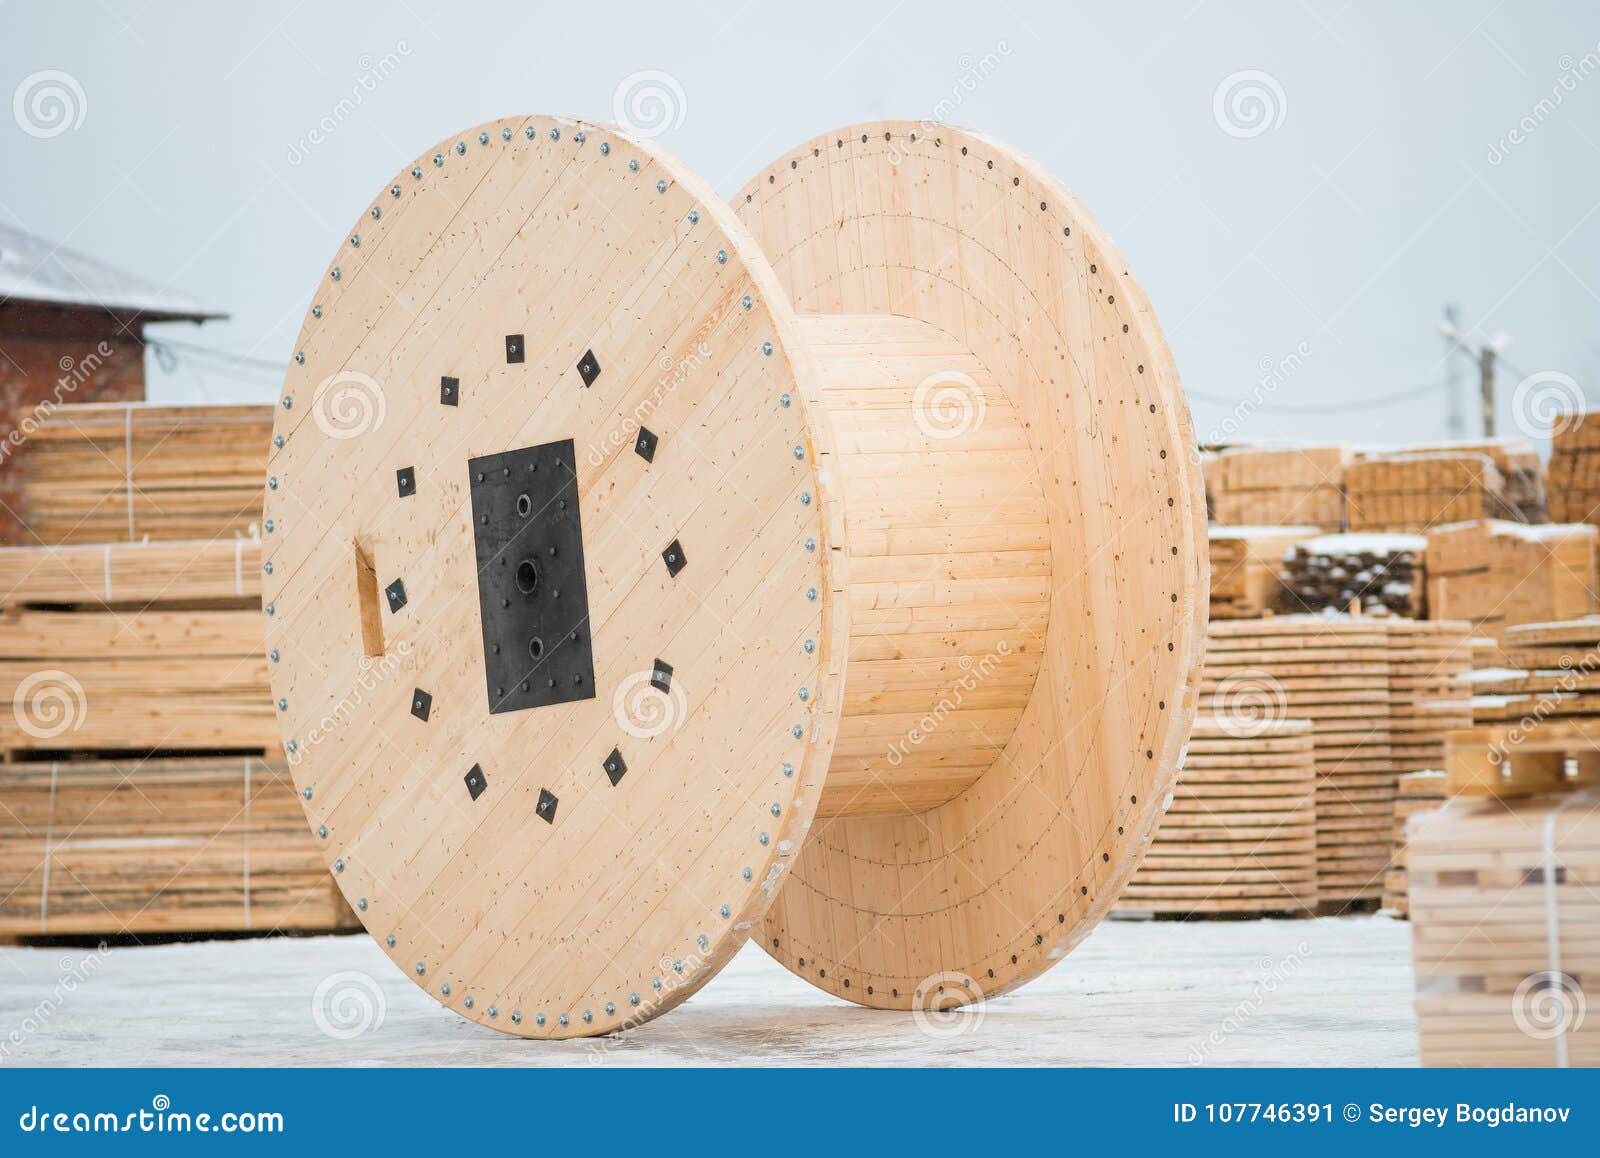 Wooden spool for cable stock image. Image of winter - 107746391